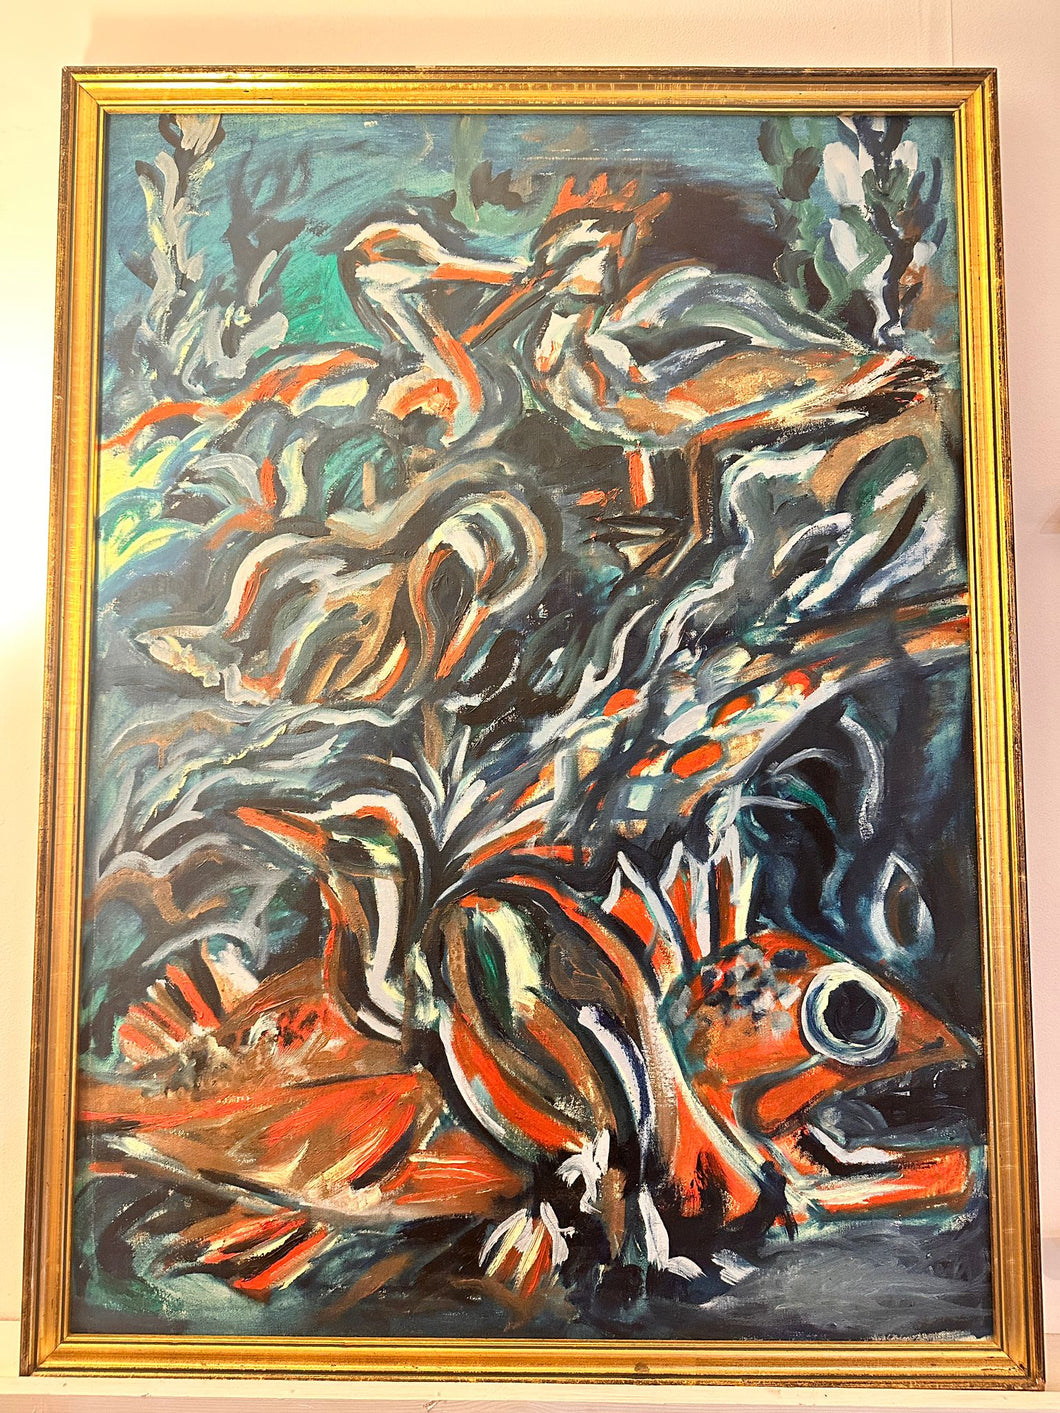 Large 80s Abstract Painting of Fish and Birds